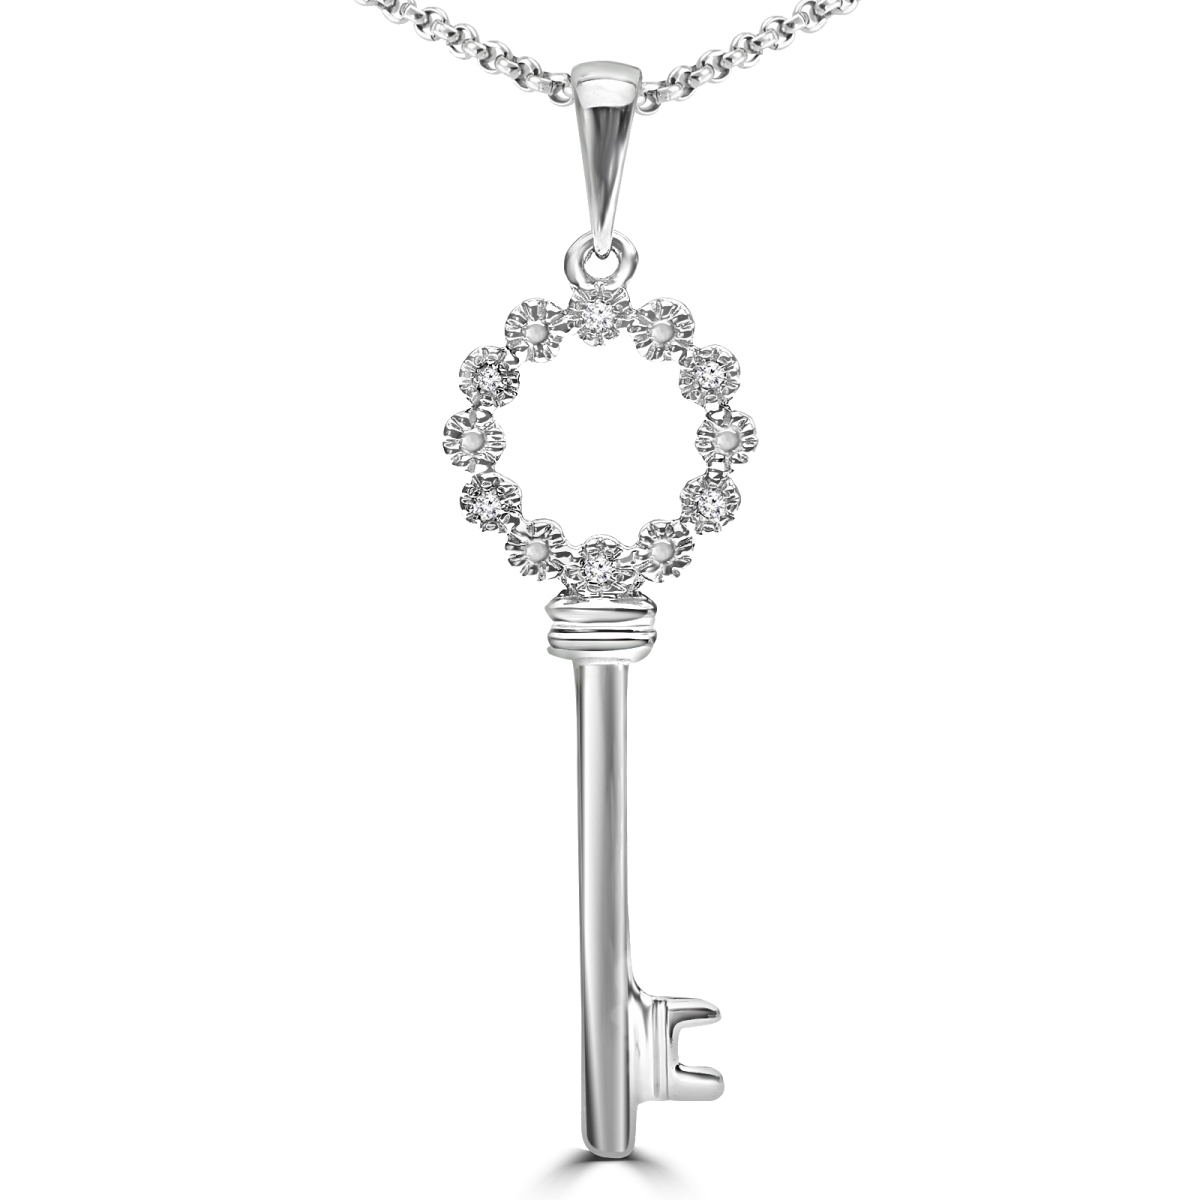 Mdr170099 0.50 Ctw Round Diamond Key Pendant Necklace In 14k